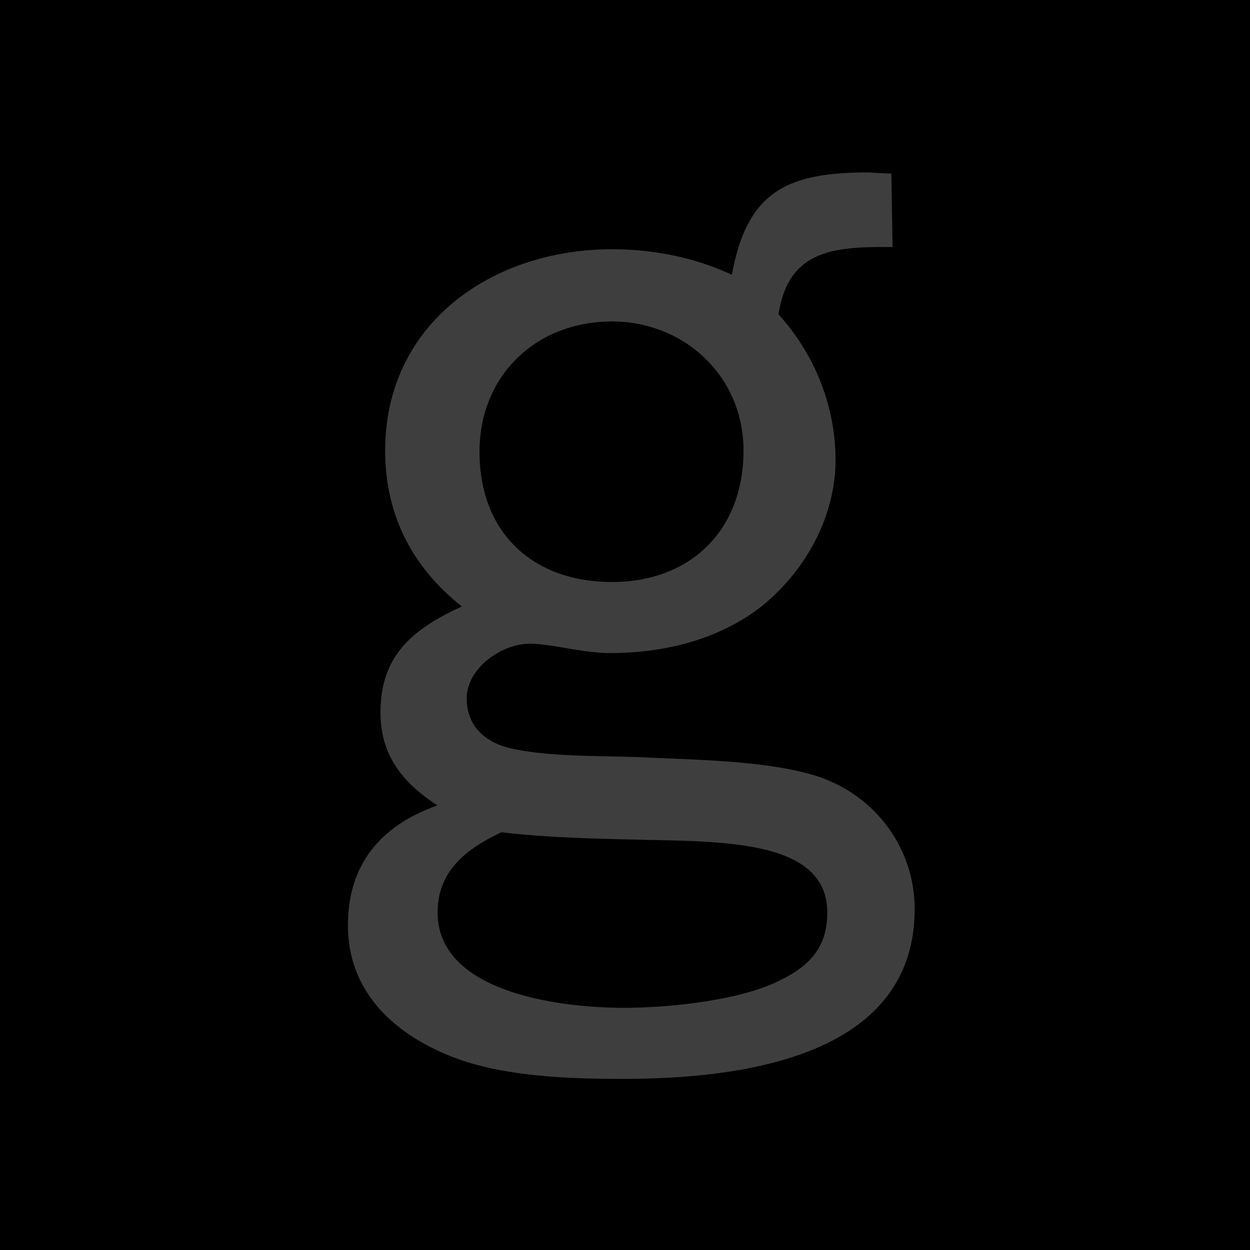 <b>Plex and Trade Gothic:</b> The double decker “g” is characteristic of the Grotesques, yet it’s unexpected in modern typefaces. We adopted this style to make Plex distinctive and more humanist.